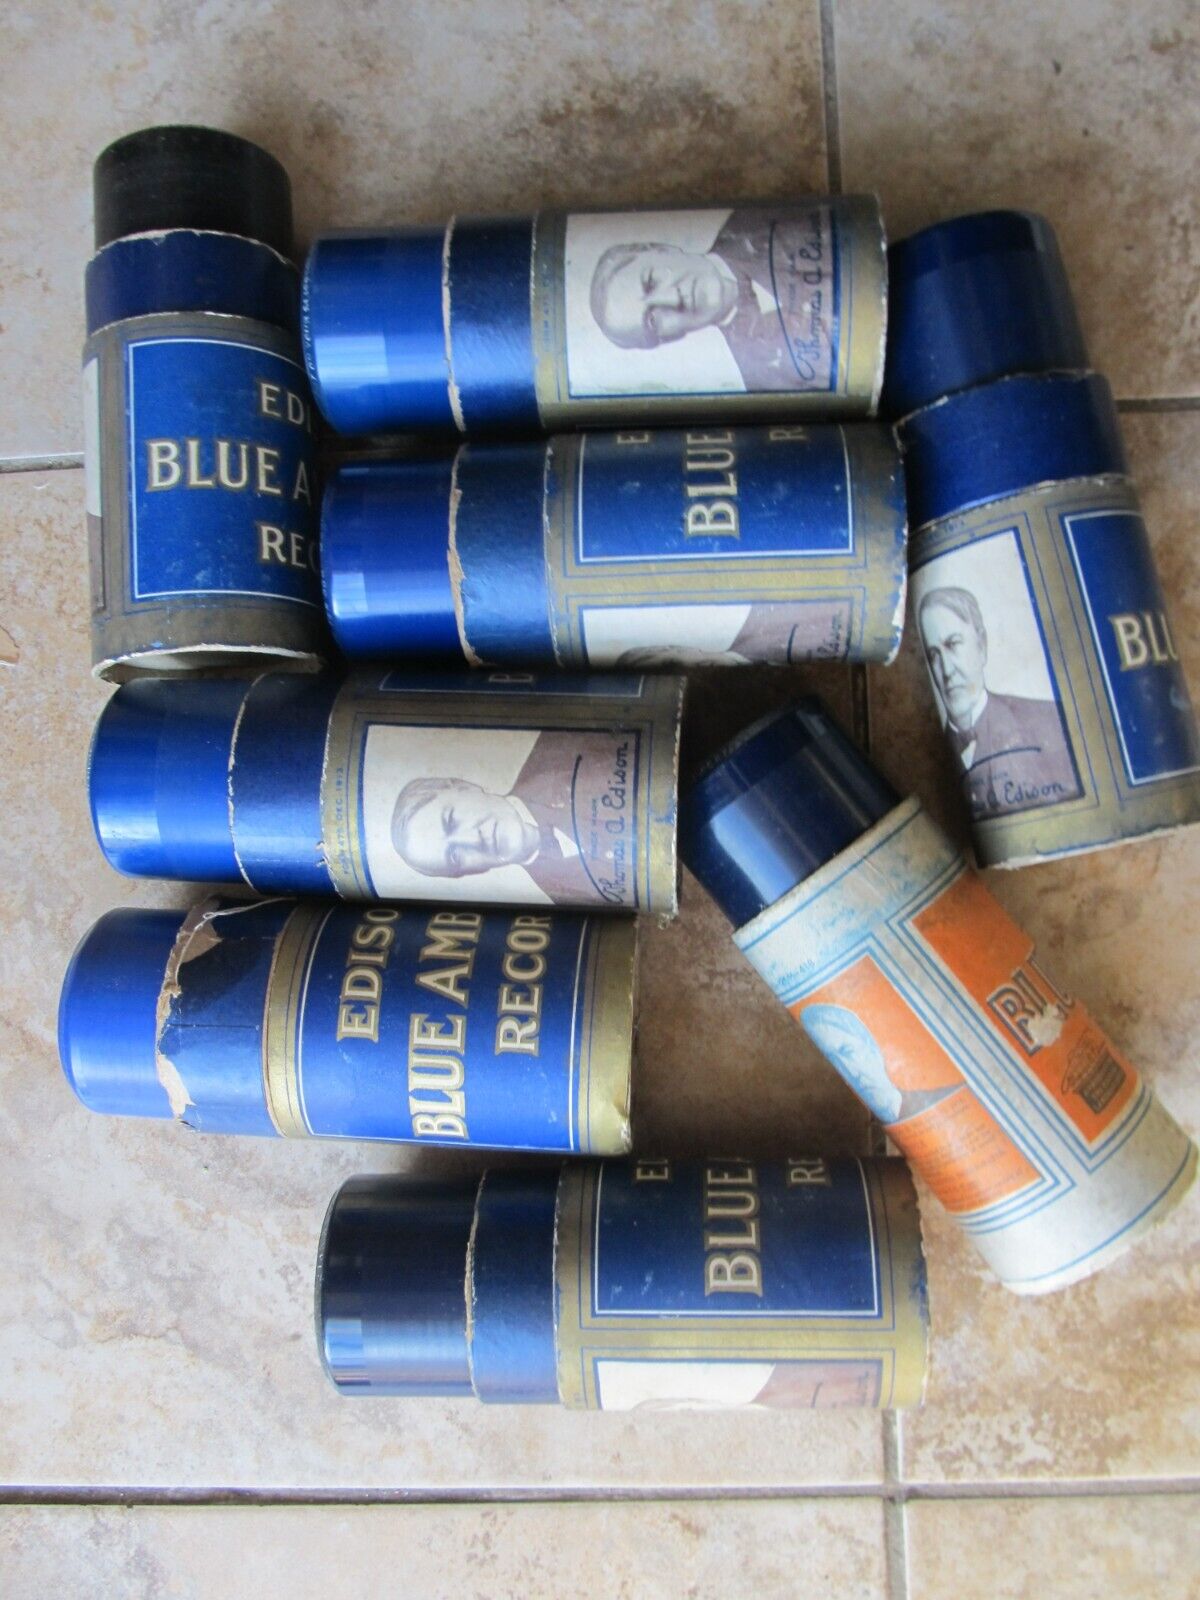 8 RARE PLAYABLE 1910 Antique Blue Amberol EDISON Phono Cylinder  Records w/Cases